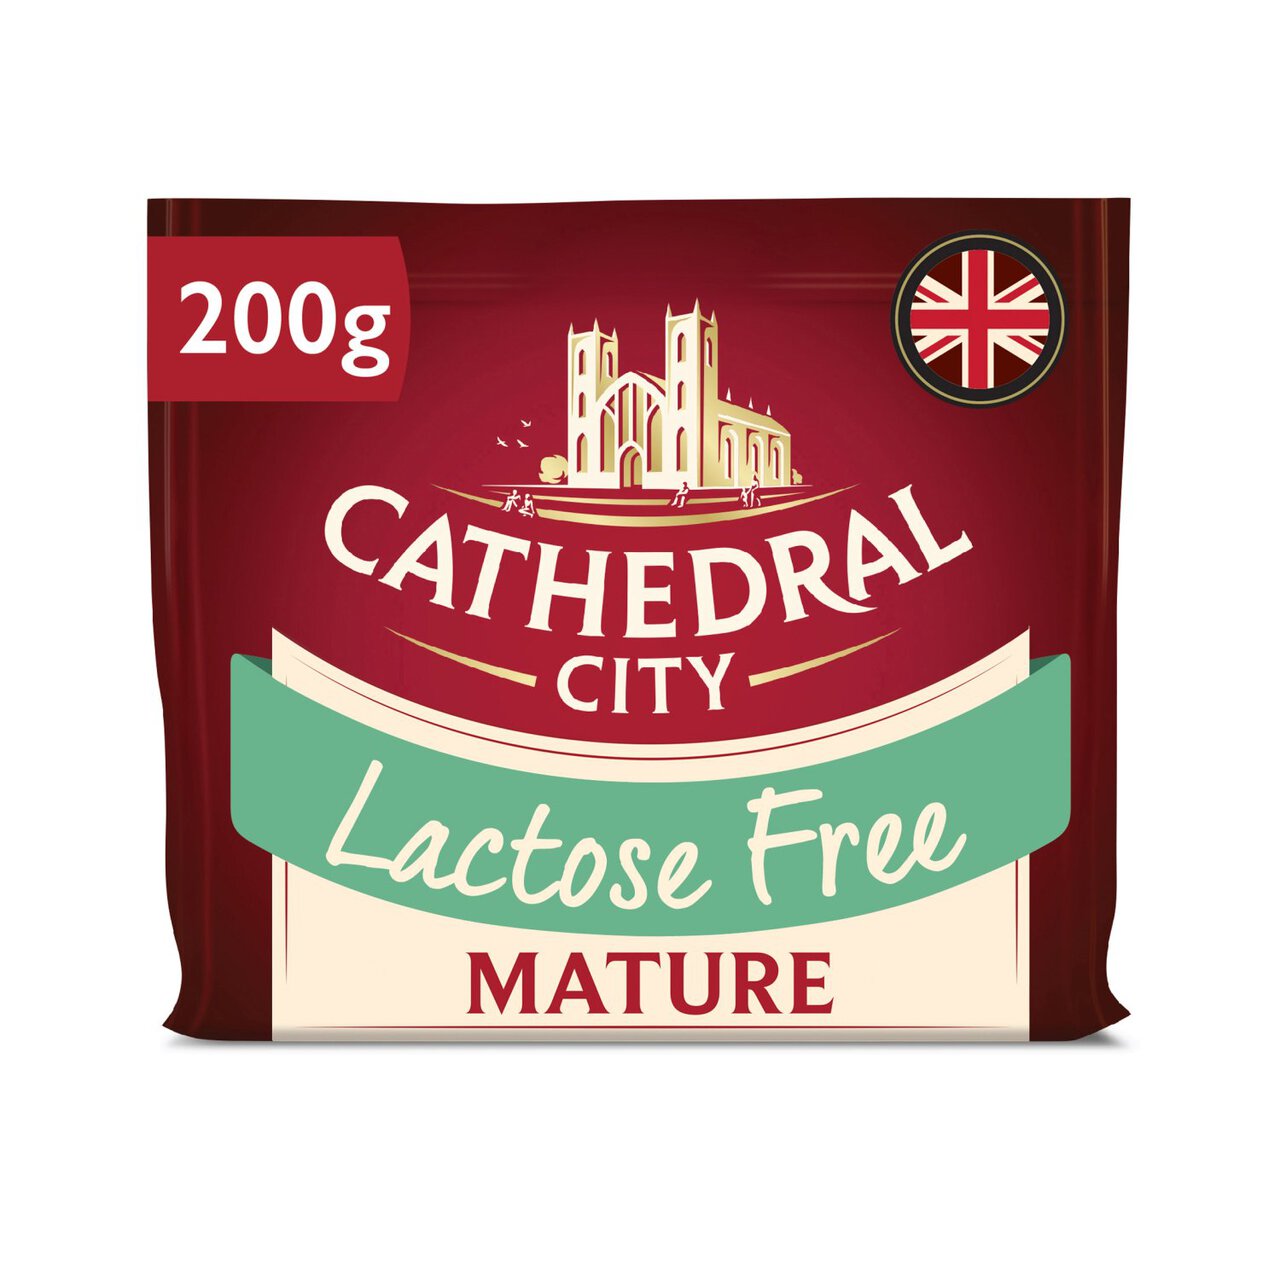 Cathedral City Lactose Free Mature Cheese 200g